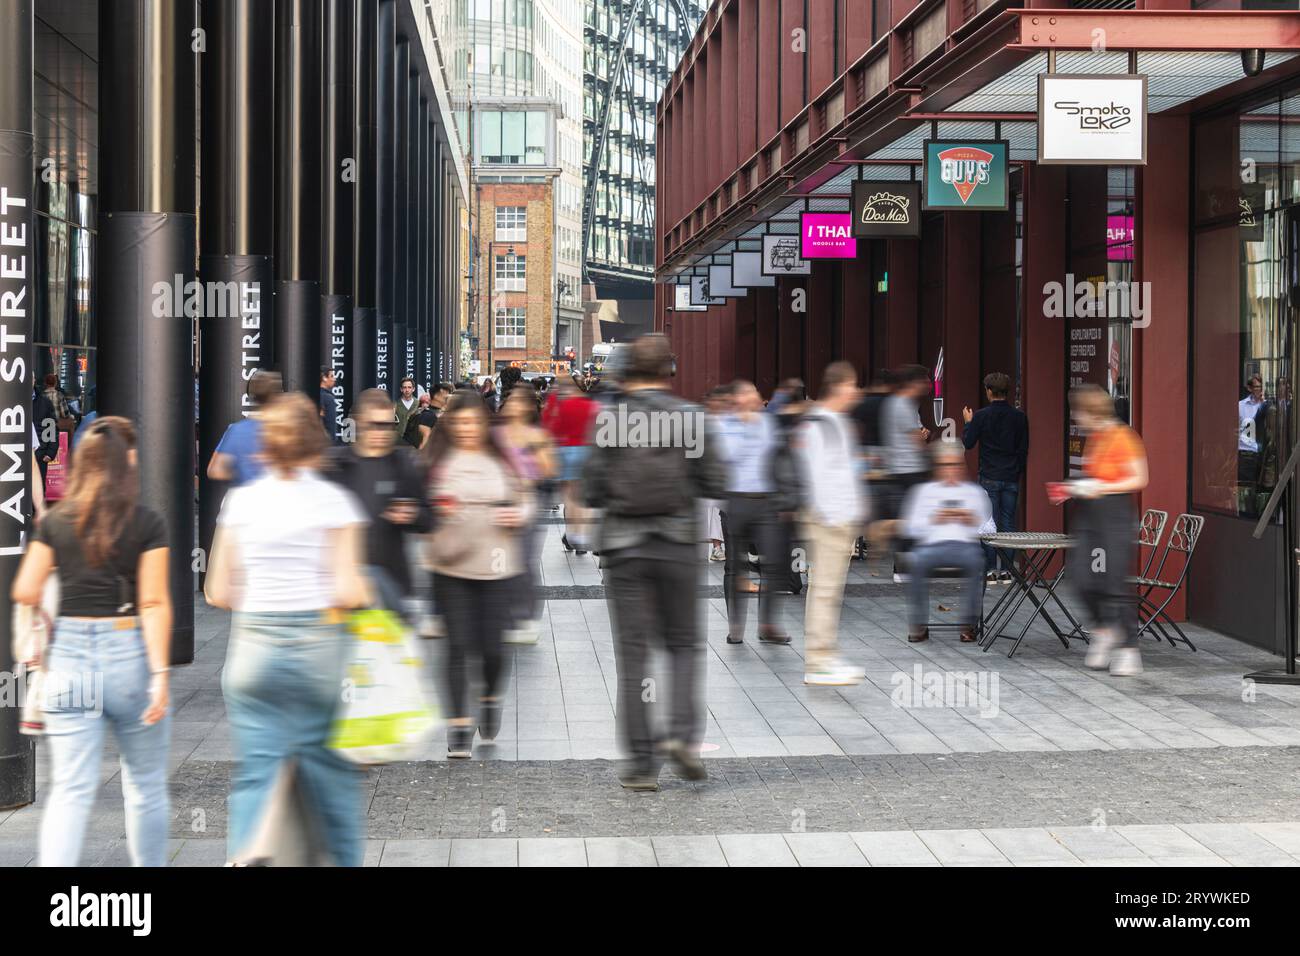 Crowds of people and restaurant outlets in Lamb St, Spitalfields, London E1. Stock Photo